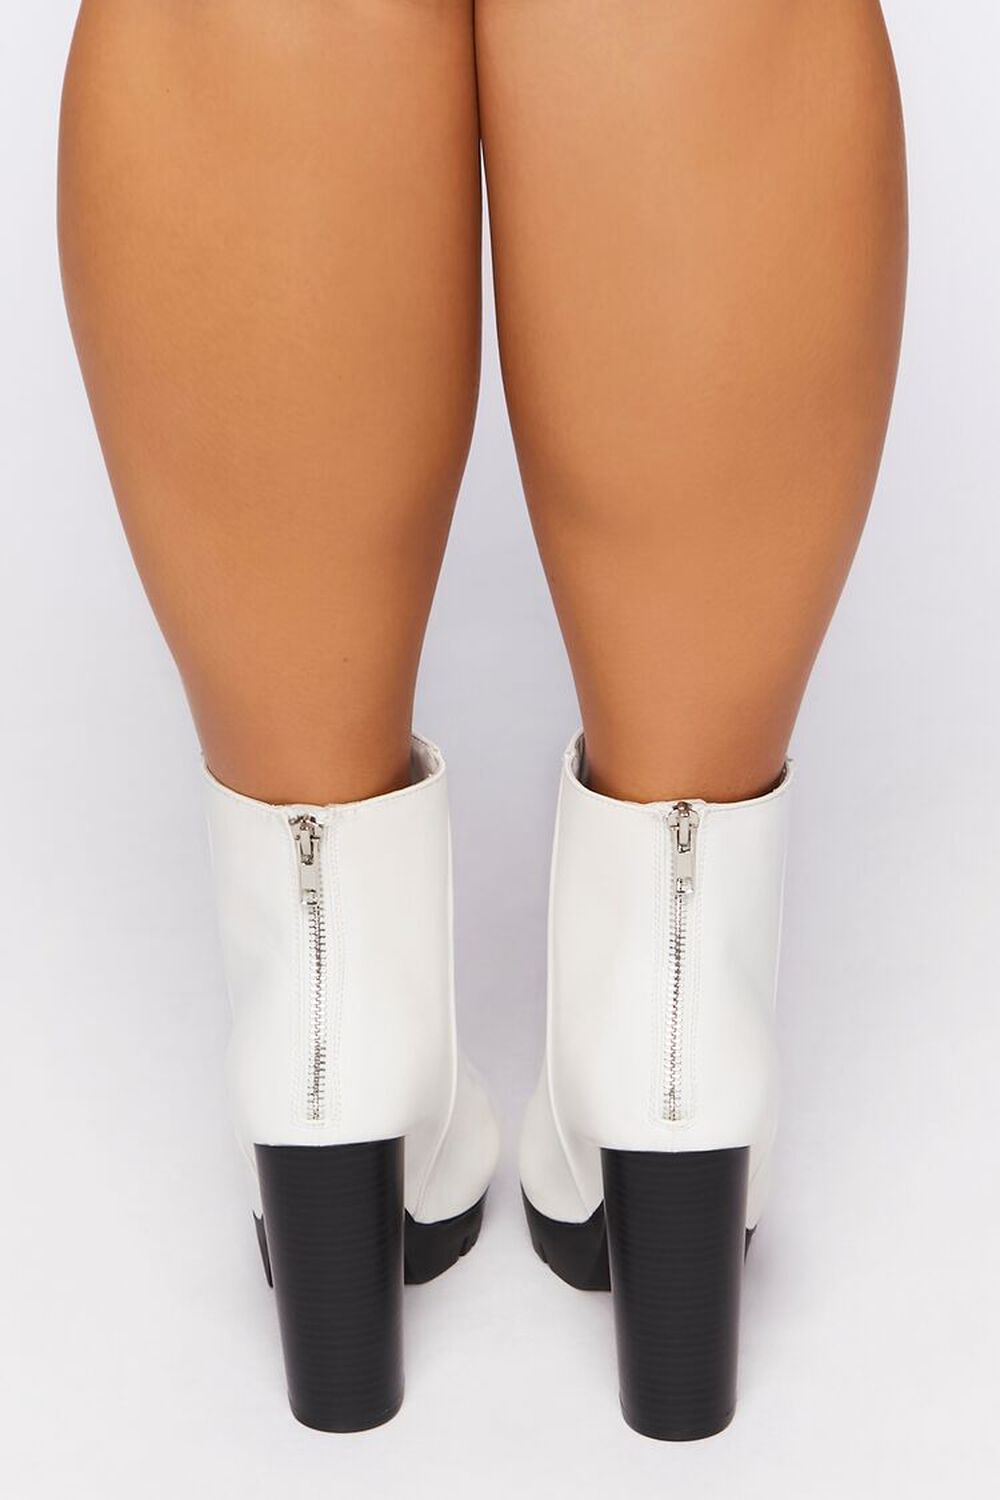 WHITE Contrast-Lug Booties (Wide), image 3